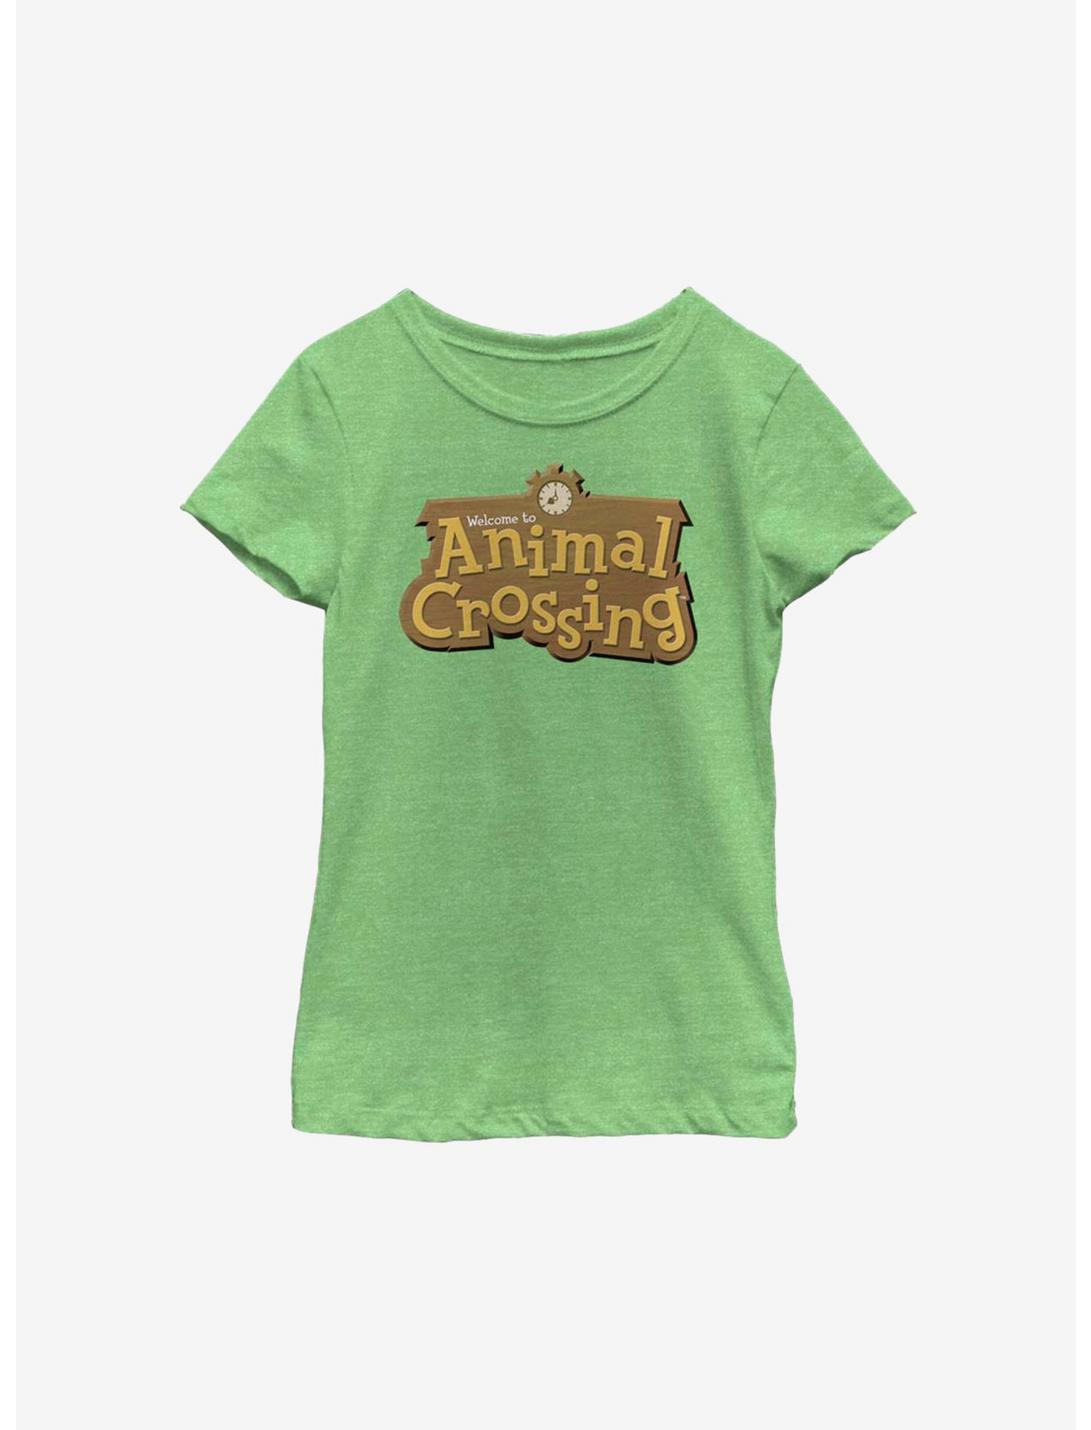 Animal Crossing Classic Welcome Sign Youth Girls T-Shirt, GREEN APPLE, hi-res